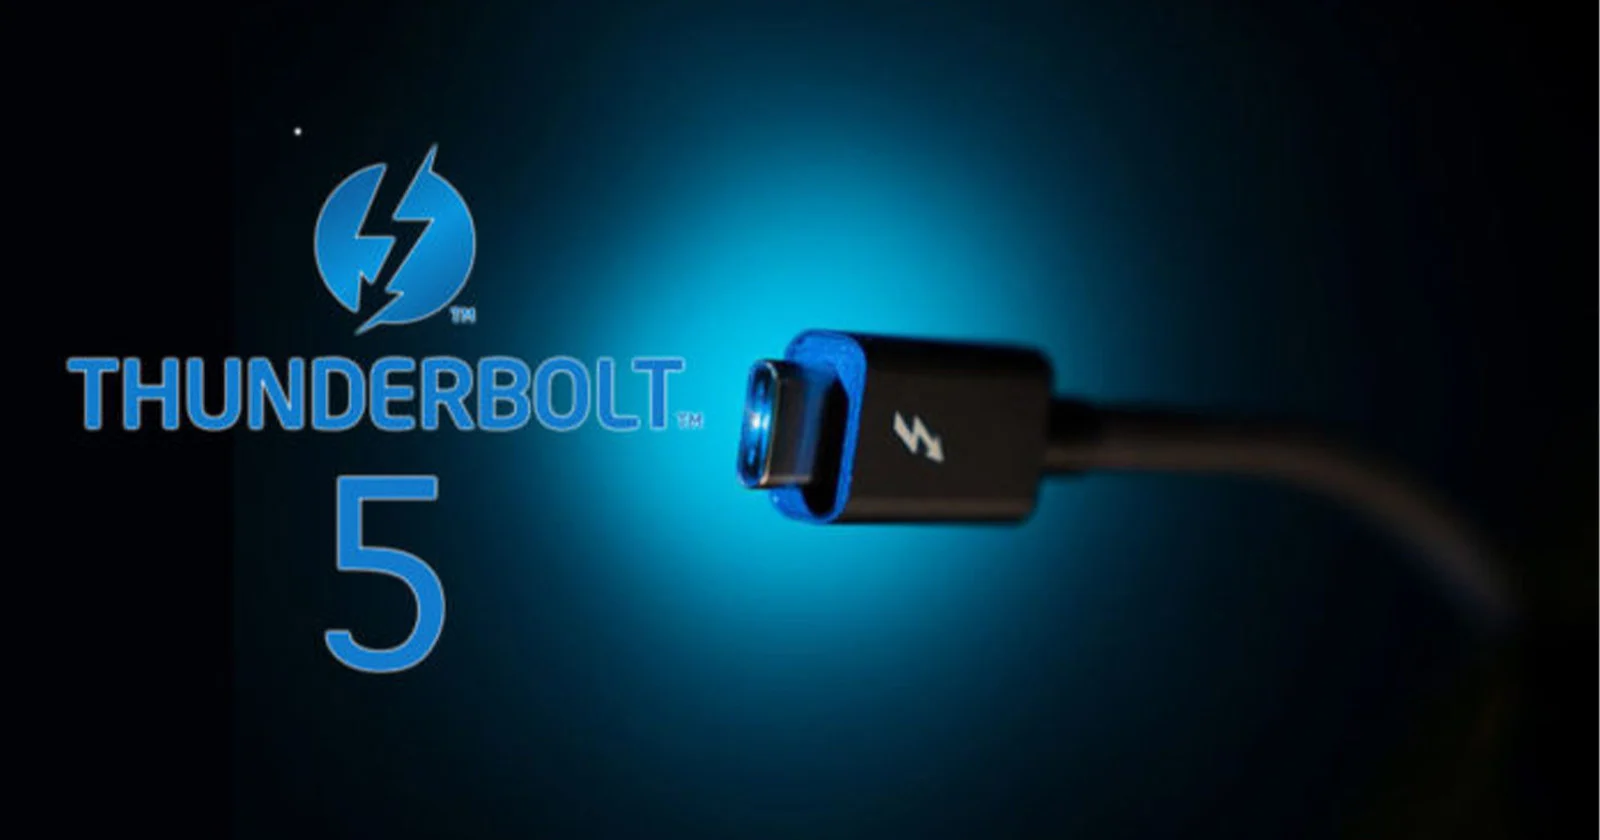 Intel's Thunderbolt has been setting the pace when it comes to high-speed connection